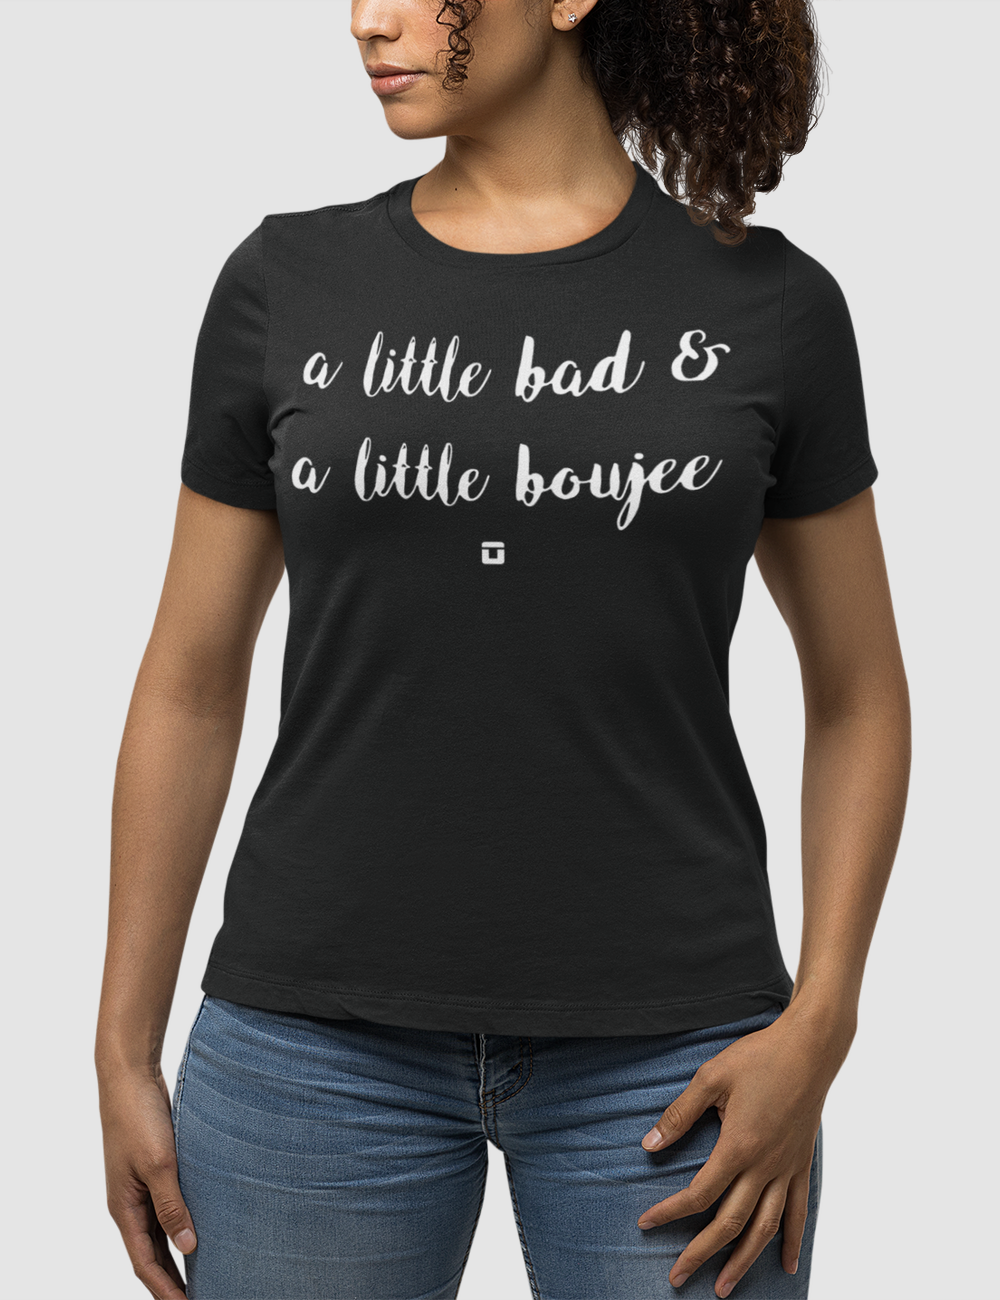 A Little Bad And A Little Boujee | Women's Fitted T-Shirt OniTakai